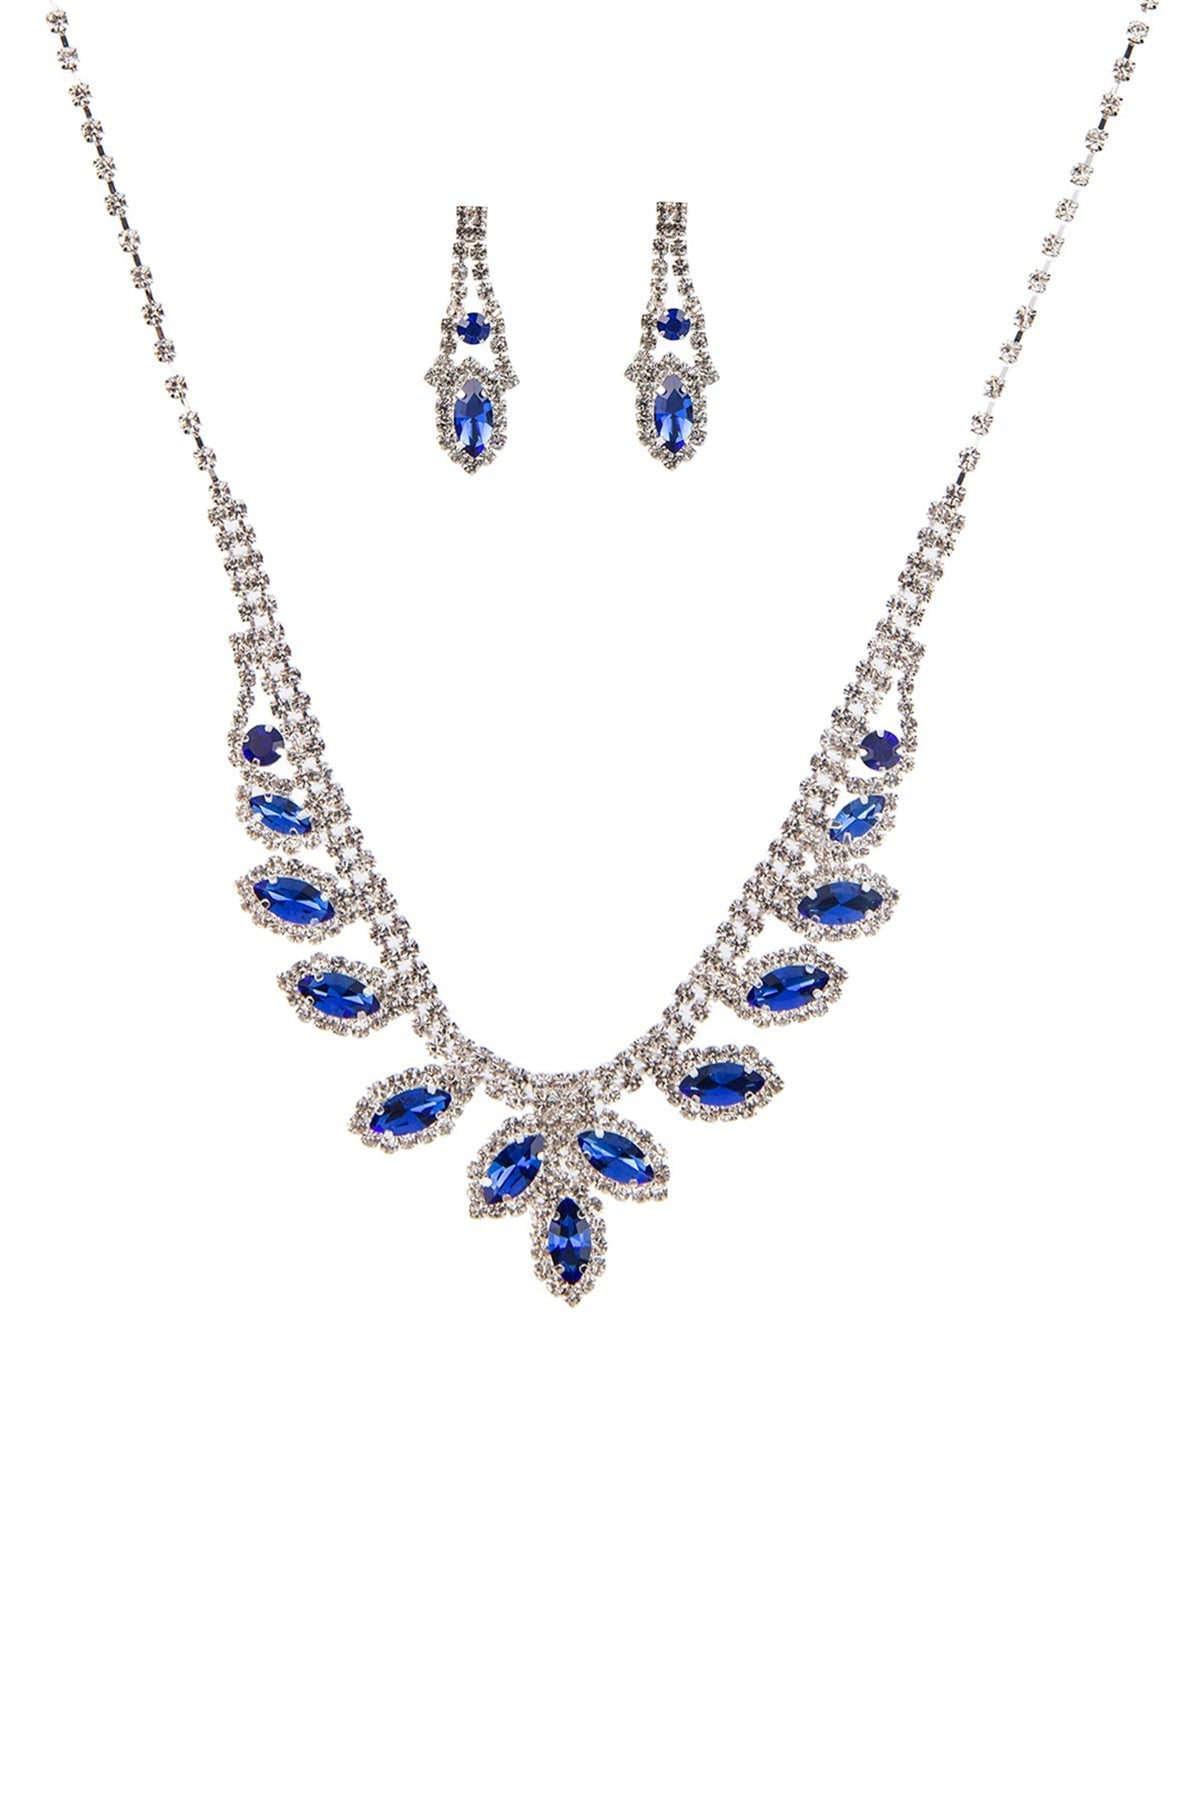 Rhinestone Marquise Wedding Necklace And Earring Set Smile Sparker